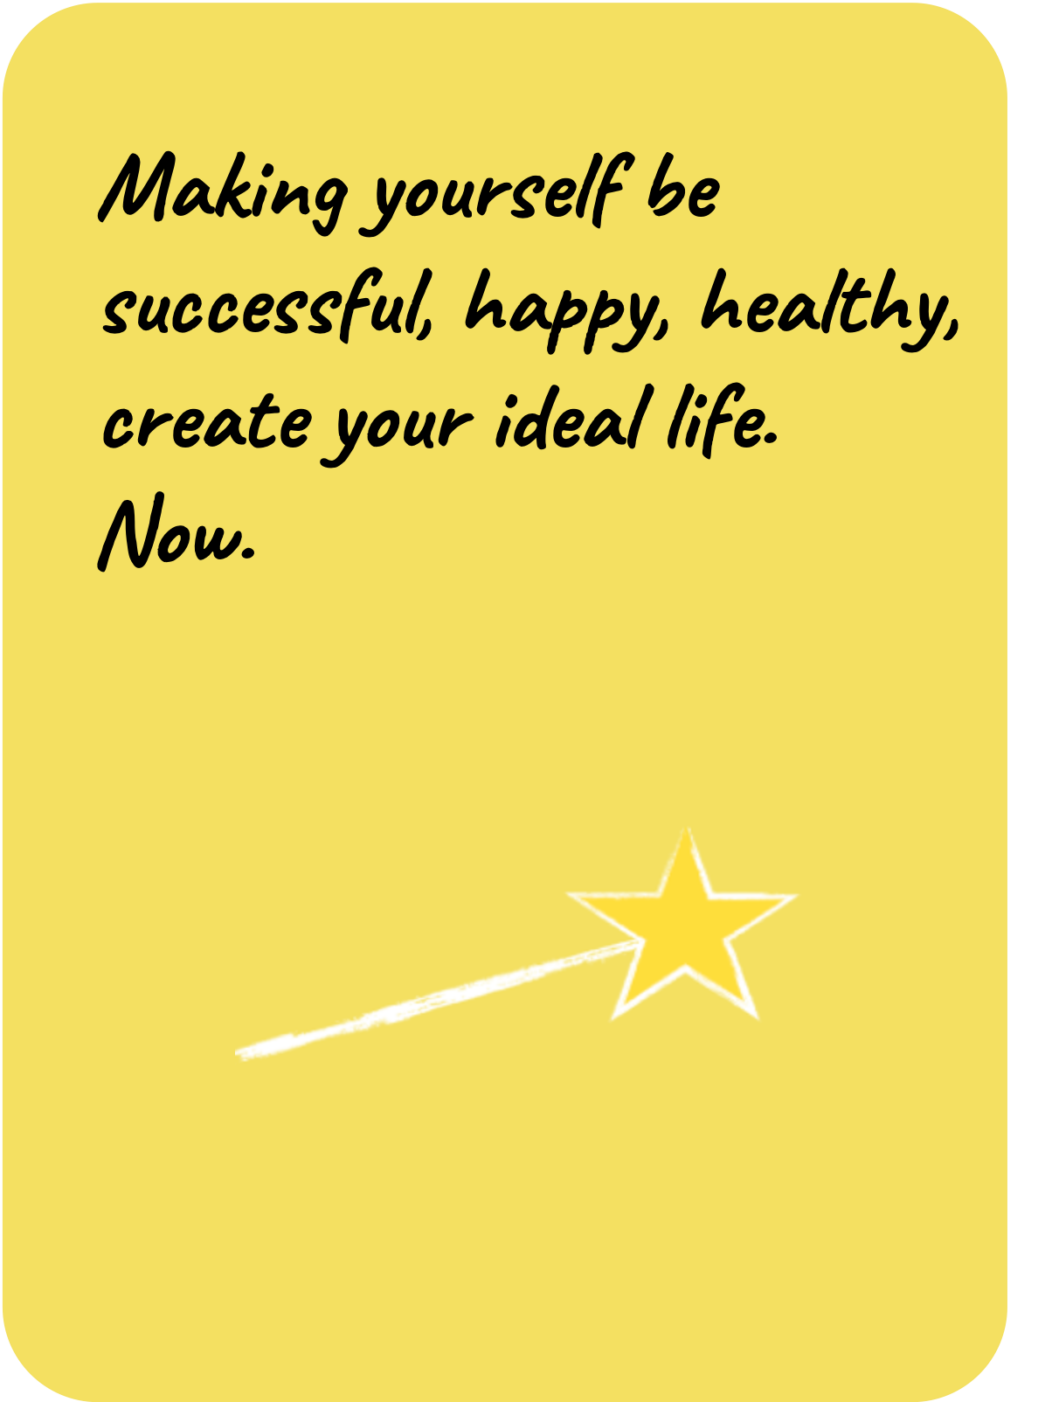 Making you be successful, happy, healthy, create your ideal life. Now